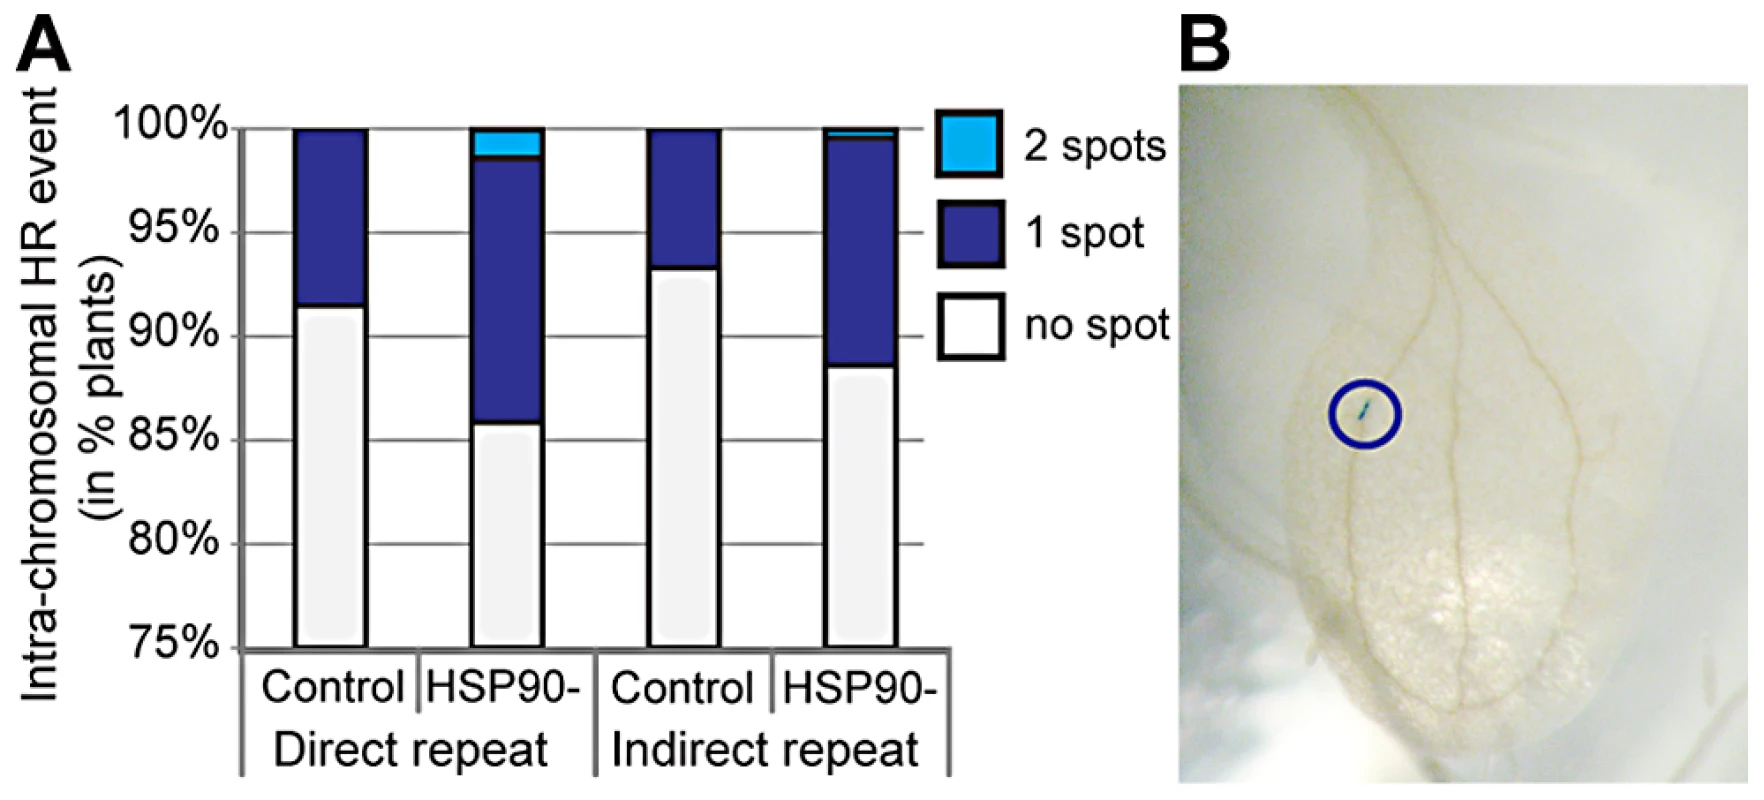 HSP90 inhibition increases homologous recombination in plants.